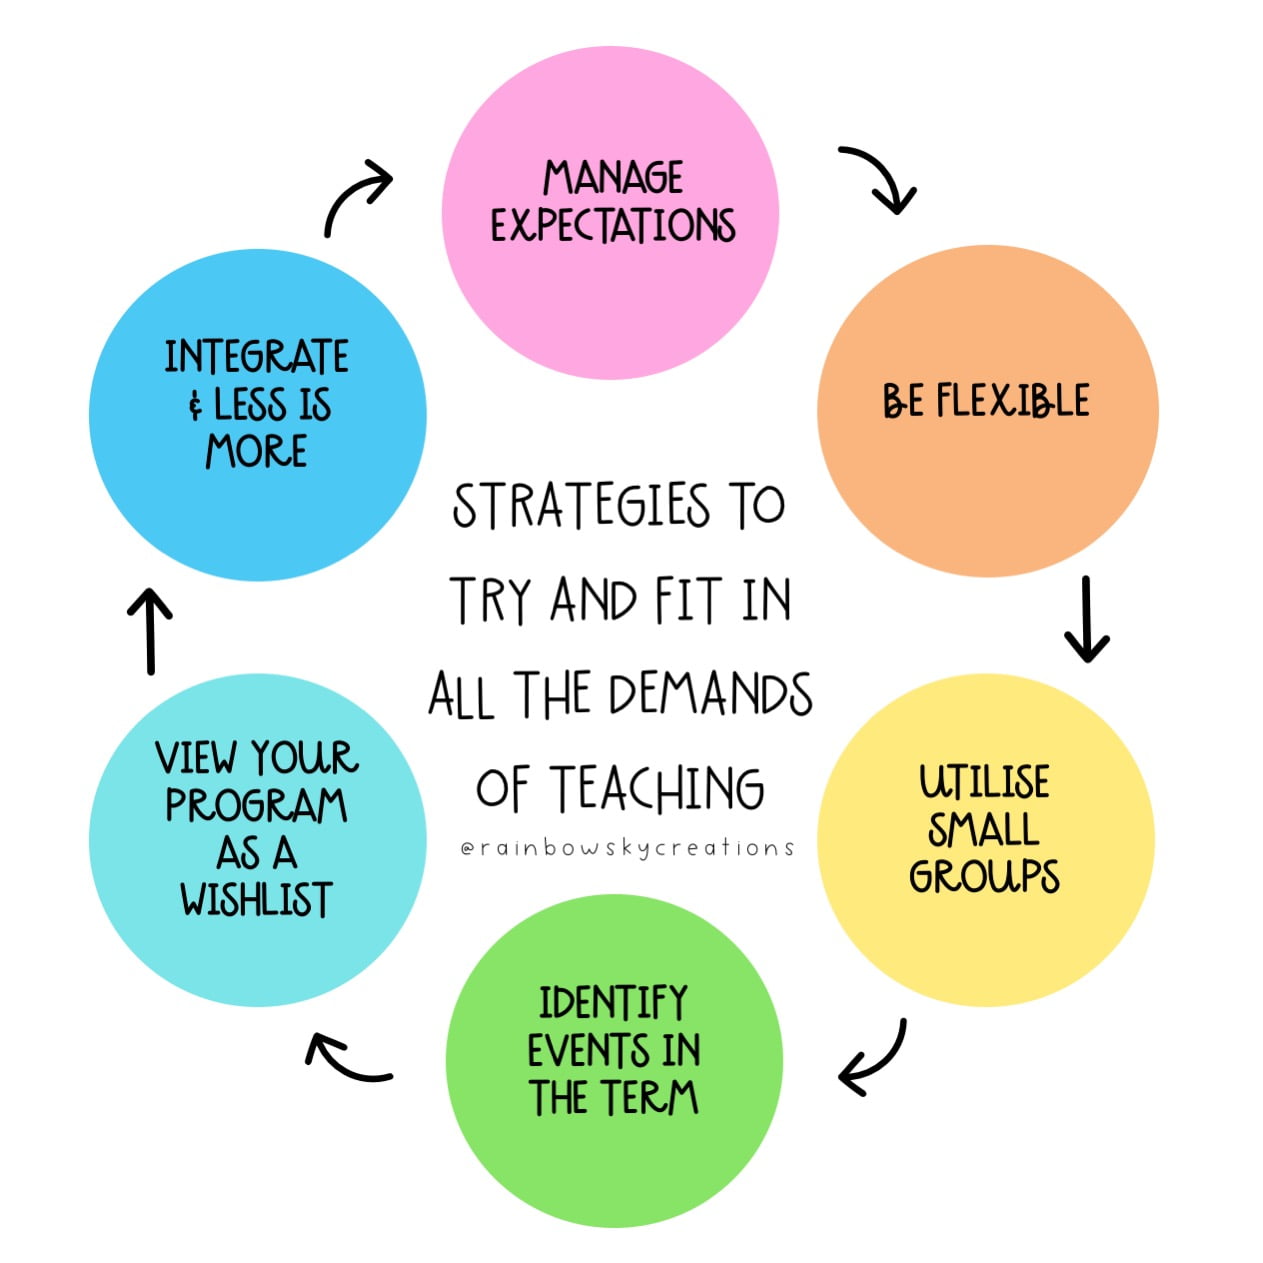 7 Strategies for 'Fitting in All the Teaching' - Rainbow Sky Creations